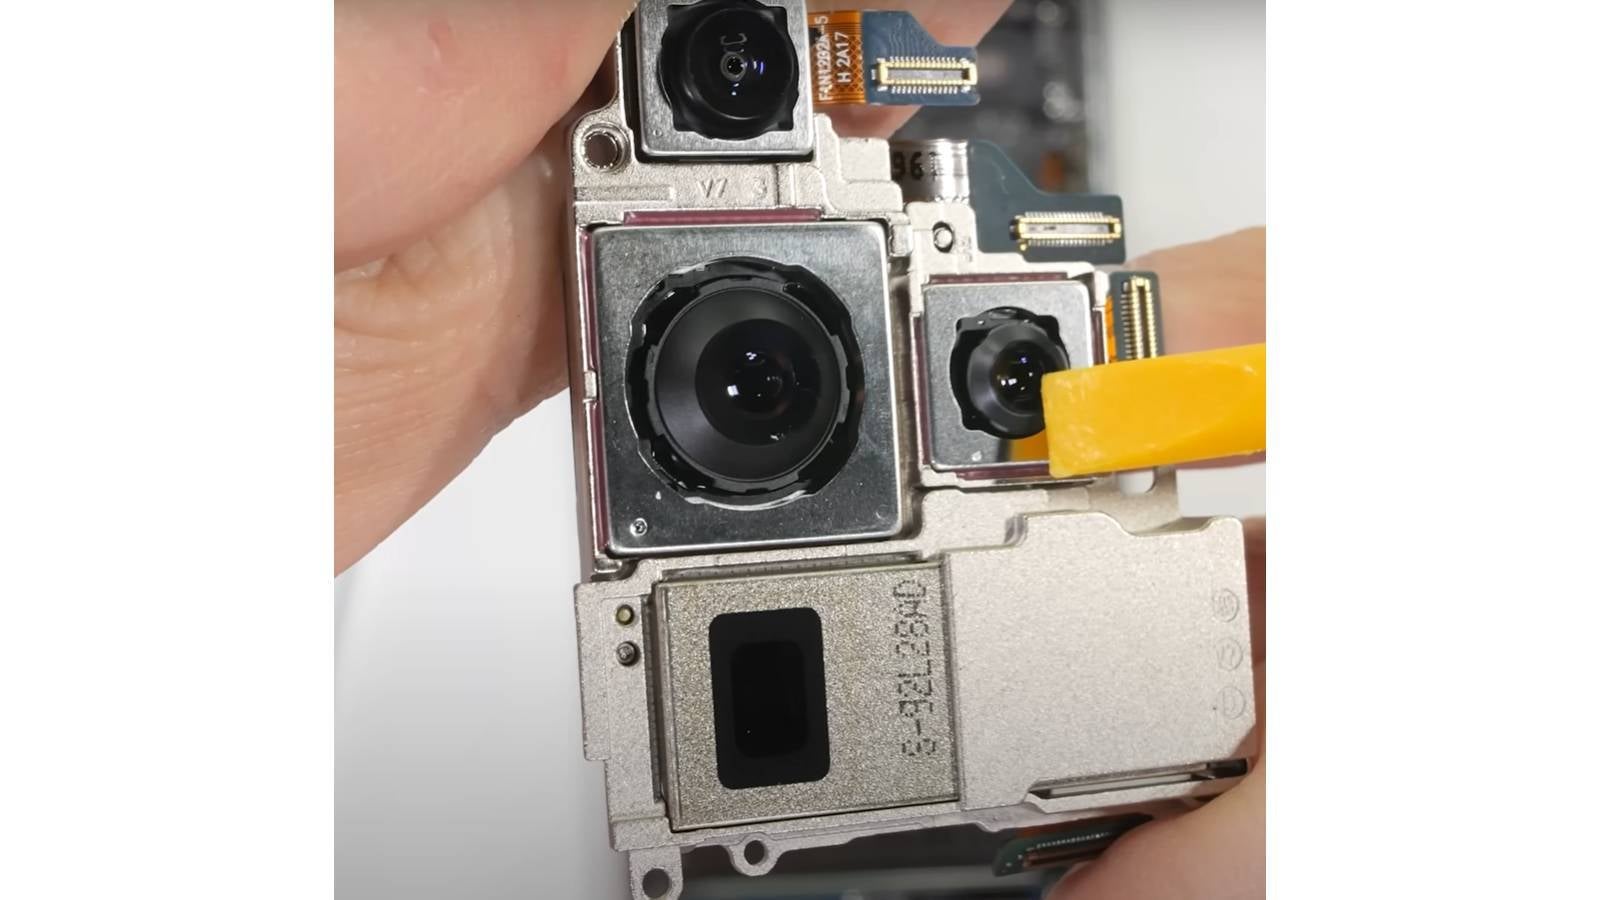 Galaxy S23 Ultra's camera array has a 10x periscope camera - Galaxy S24 Ultra factory leak appears to confirm the worst suspicion about the phone